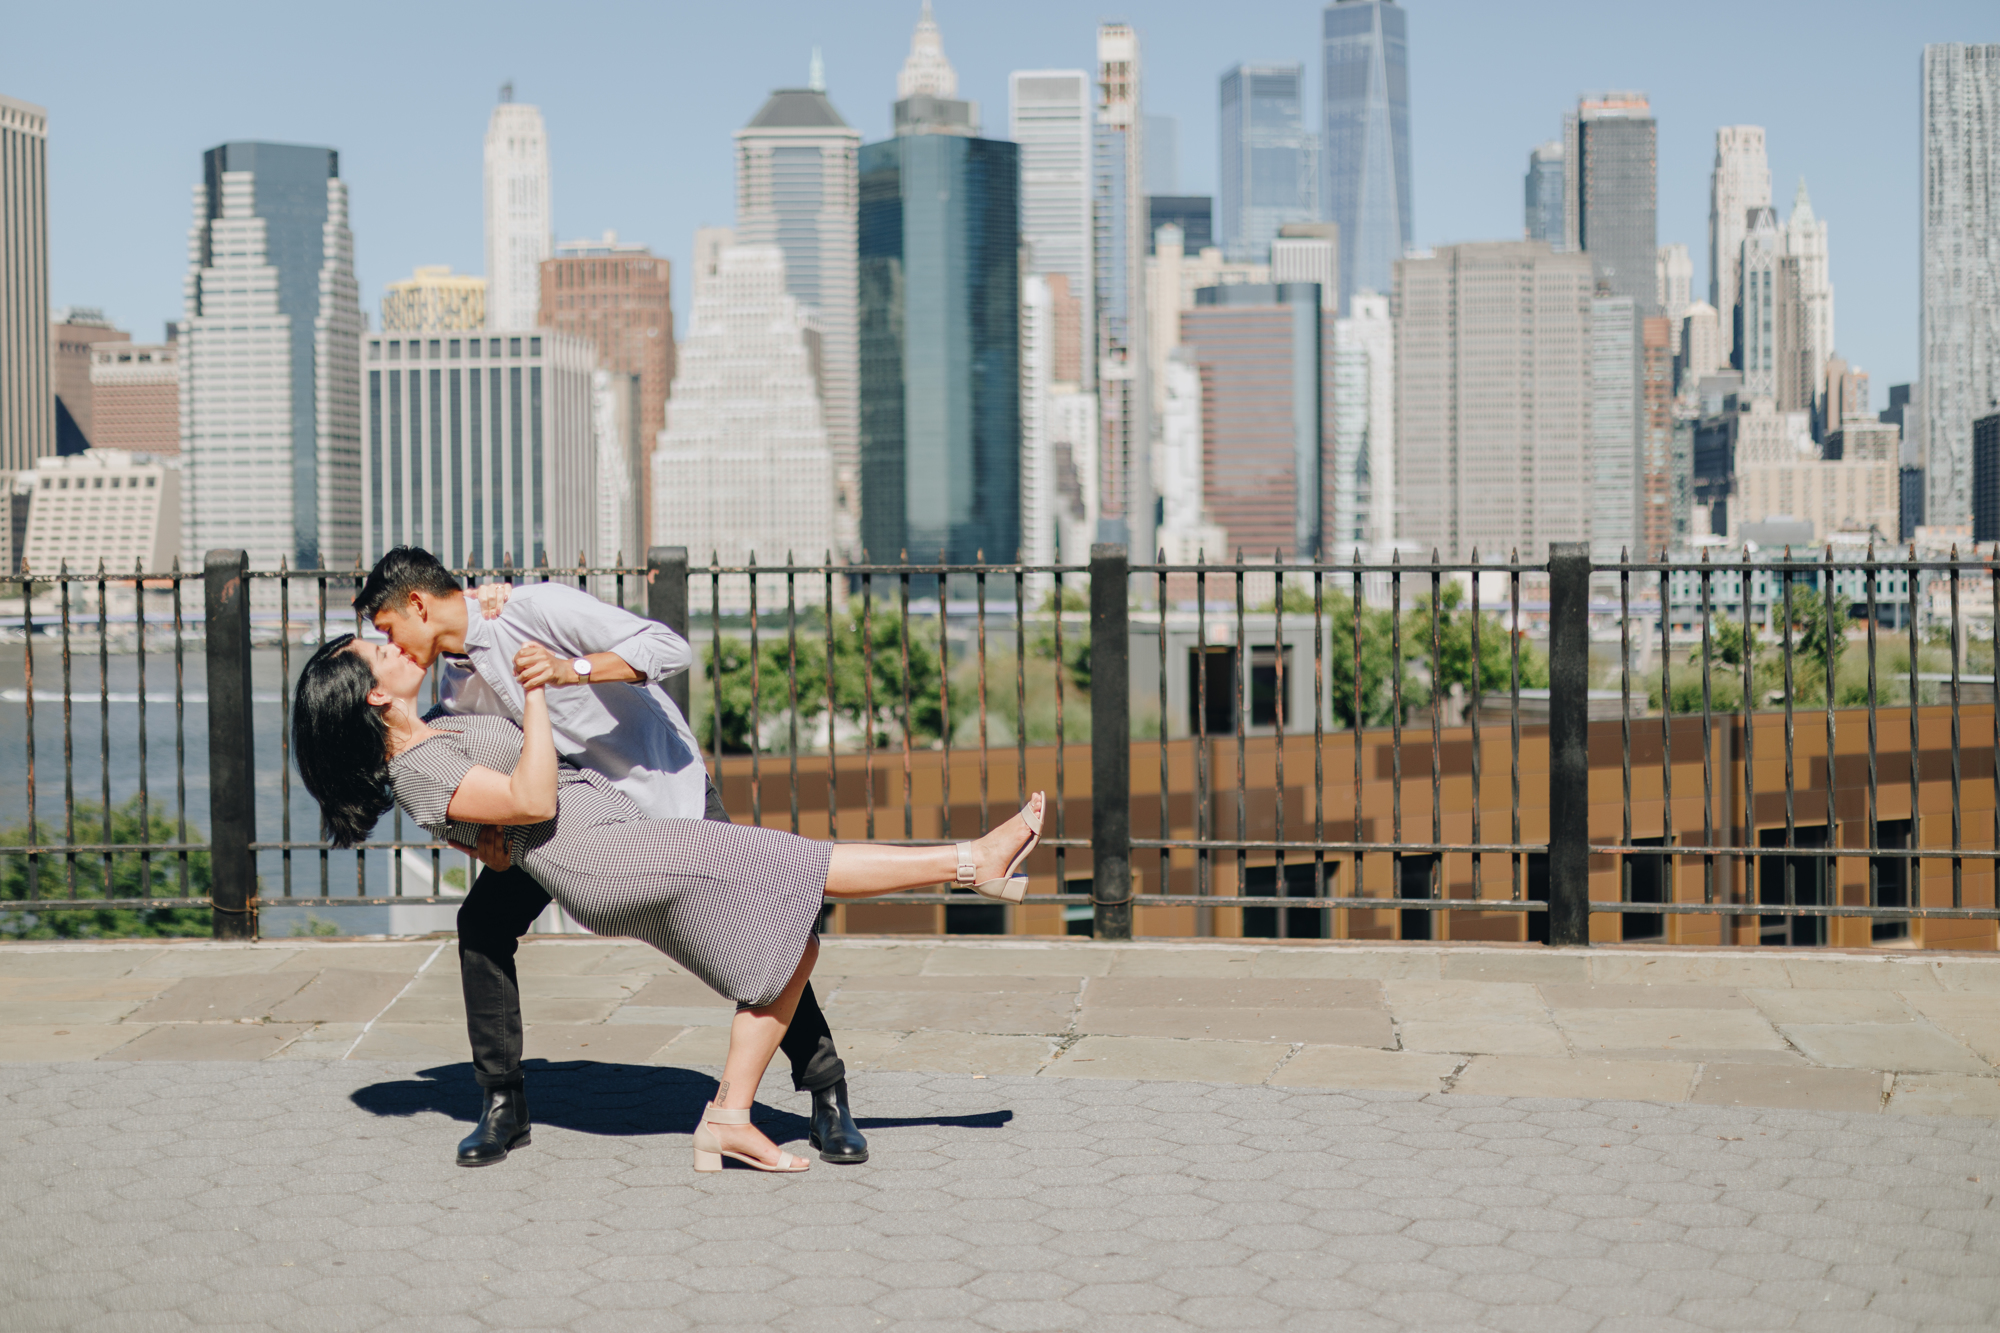 Playful Brooklyn Heights Promenade Engagement Photos in Summery New York